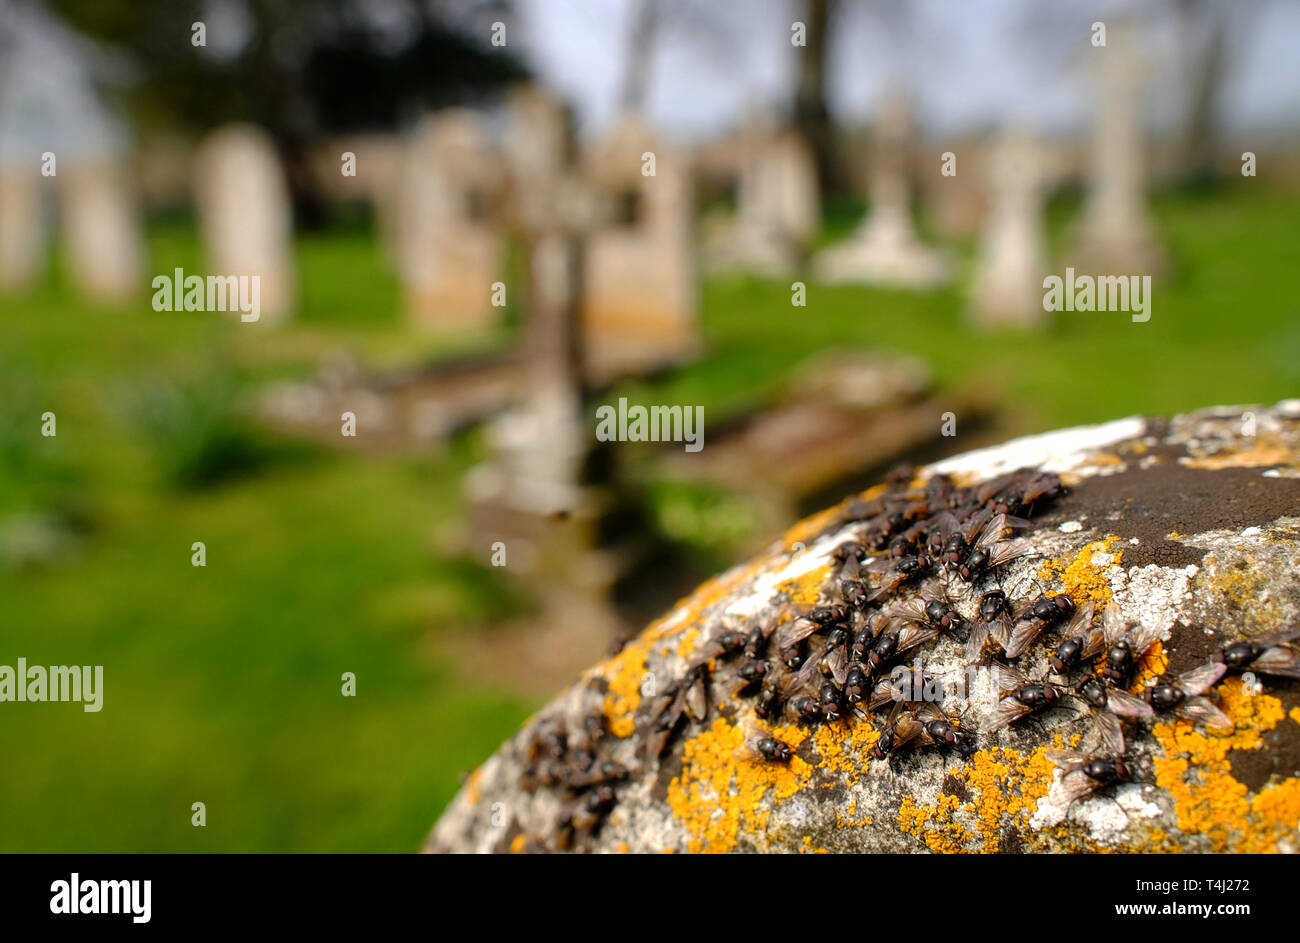 Barcombe, East Sussex, UK. 17th April 2019. A swarm of flies plagues Barcombe churchyard, East Sussex on the first warm day after the recent arctic blast. The recently hatched insects land on anything in their path as they search for food. © Peter Cripps/Alamy Live News Stock Photo